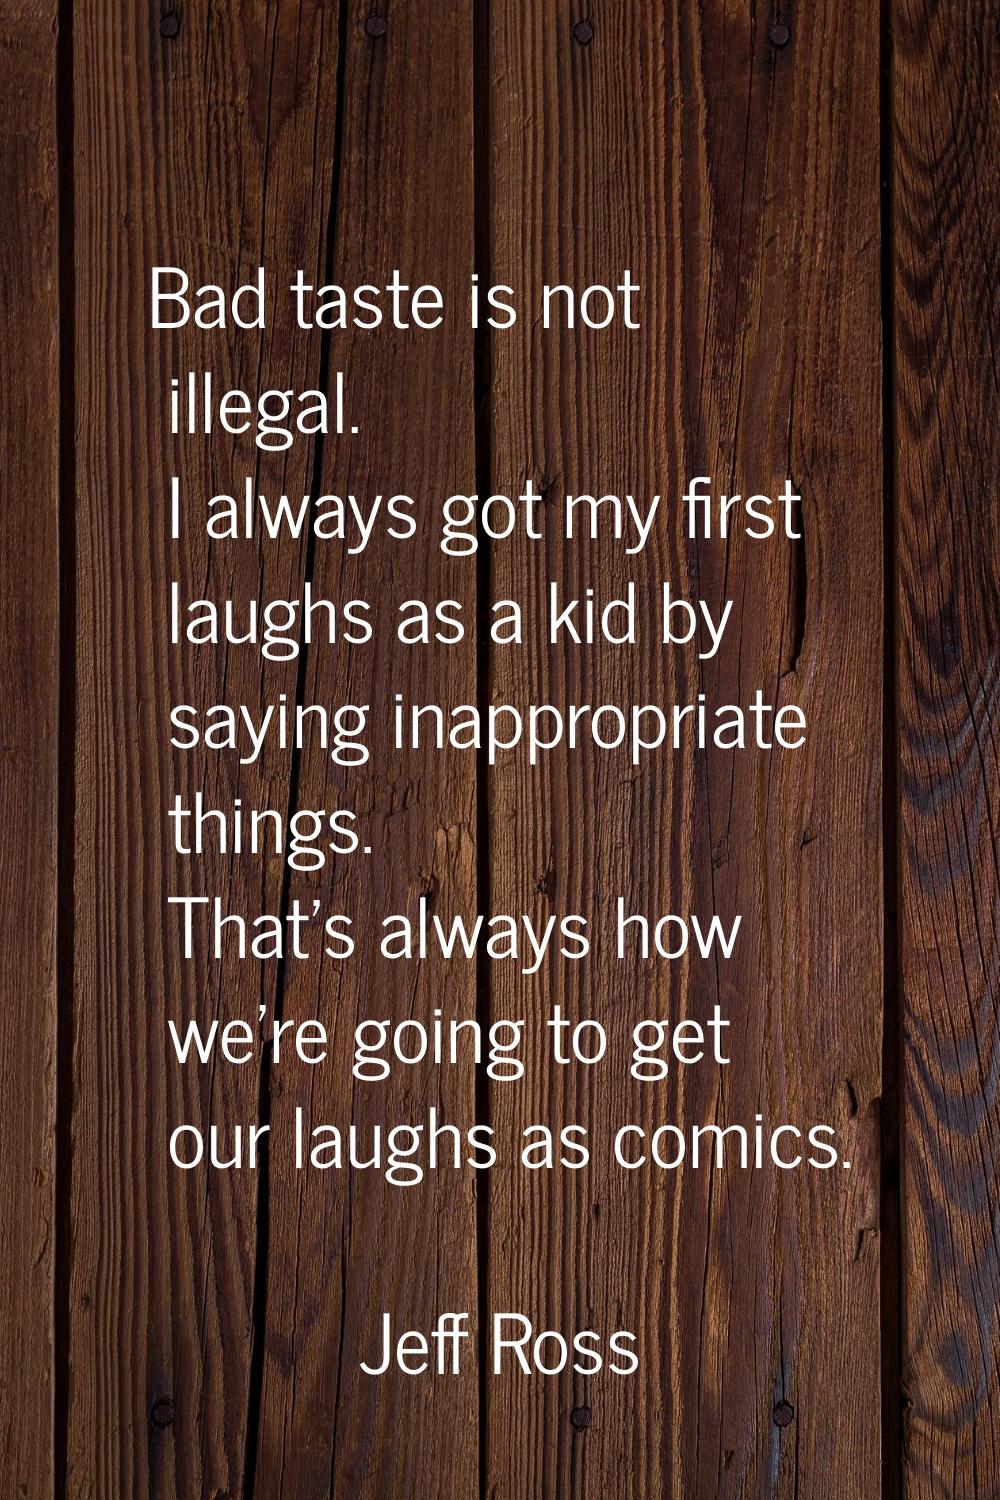 Bad taste is not illegal. I always got my first laughs as a kid by saying inappropriate things. Tha